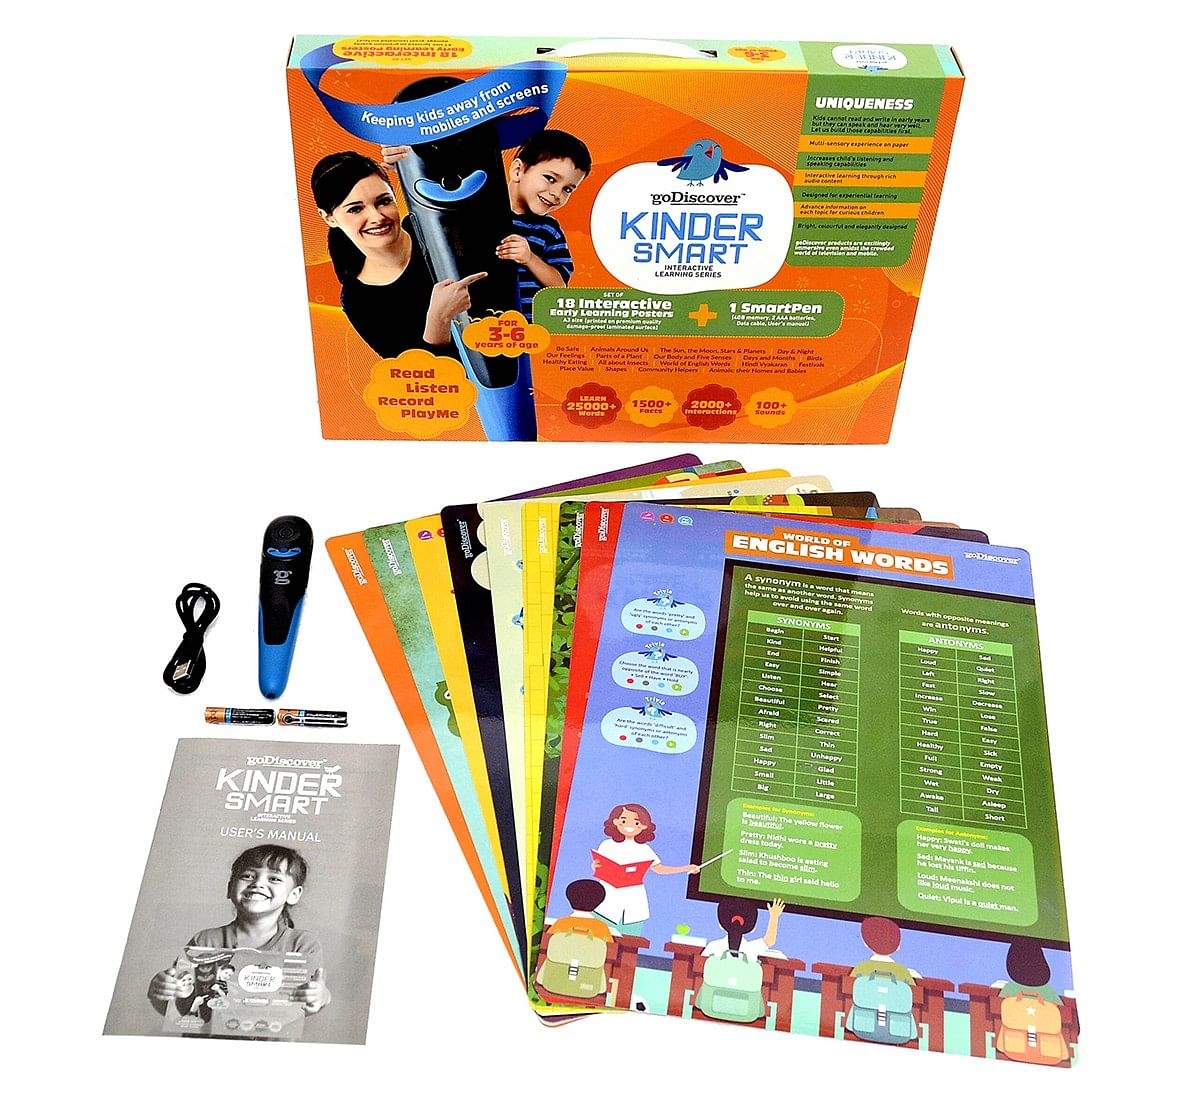 Go Discover Kinder Smart Interactive Learning Series Games for Kids 3Y+, Multicolour